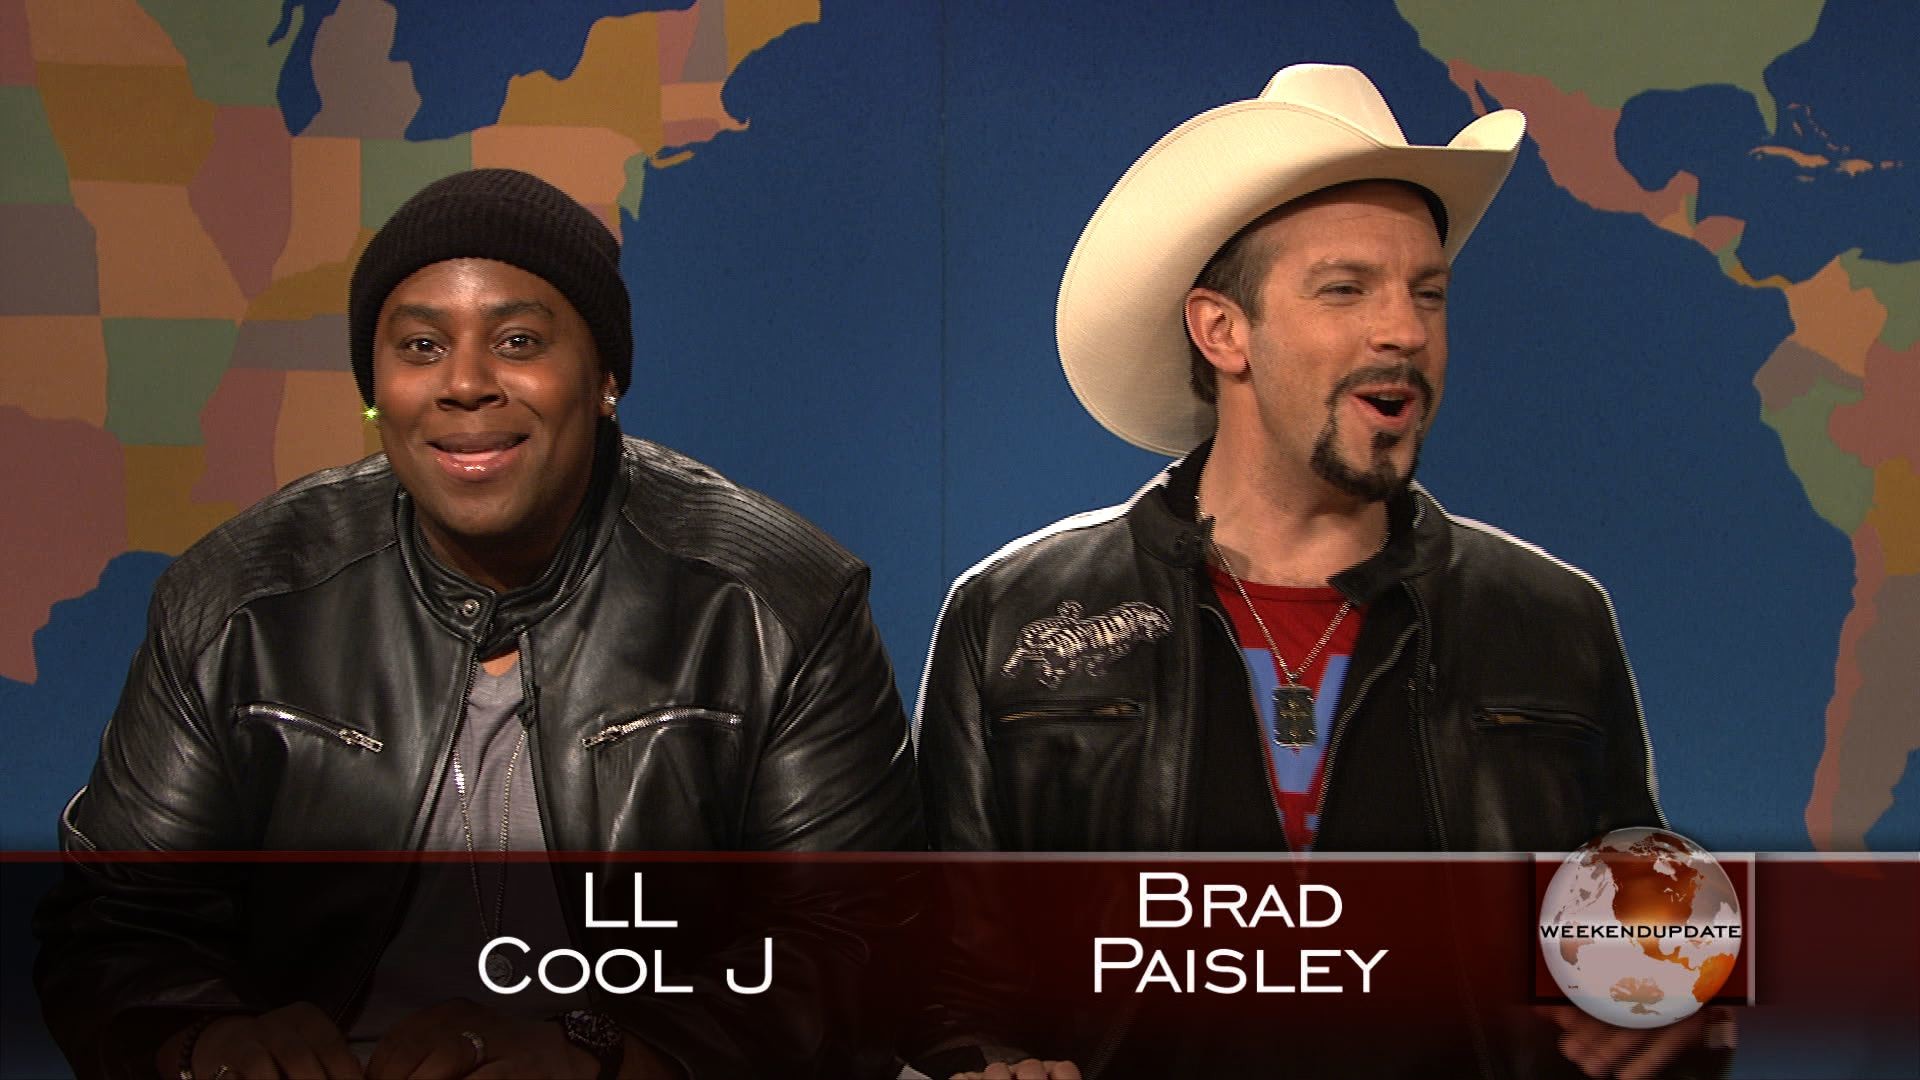 1920x1080 Watch Weekend Update: LL Cool J and Brad Paisley on Misguided Racist From  Saturday Night Live - NBC.com